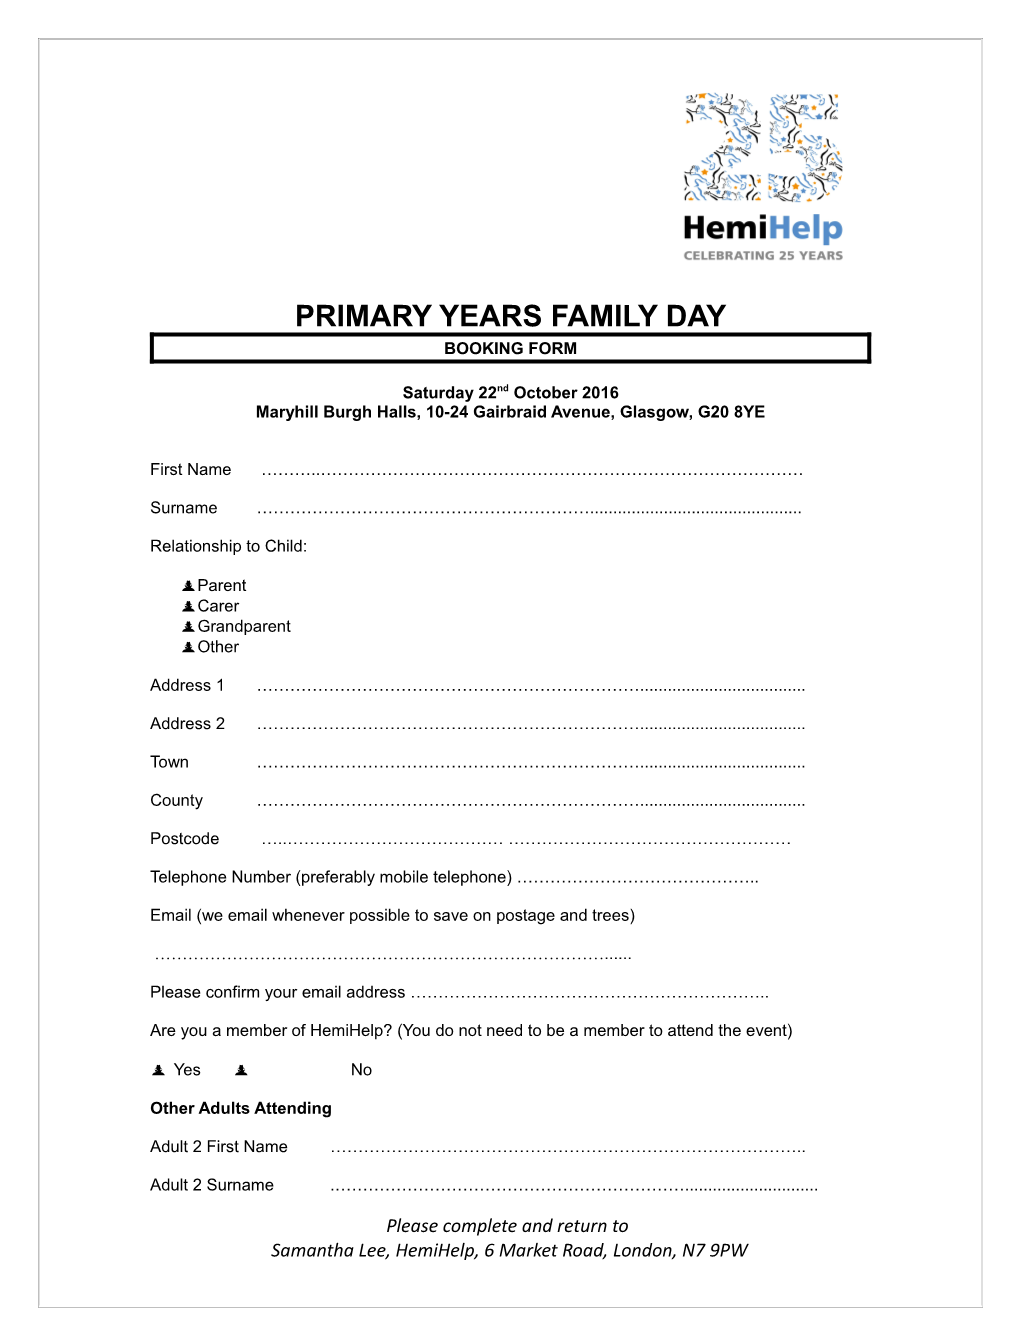 Primary Years Family Day